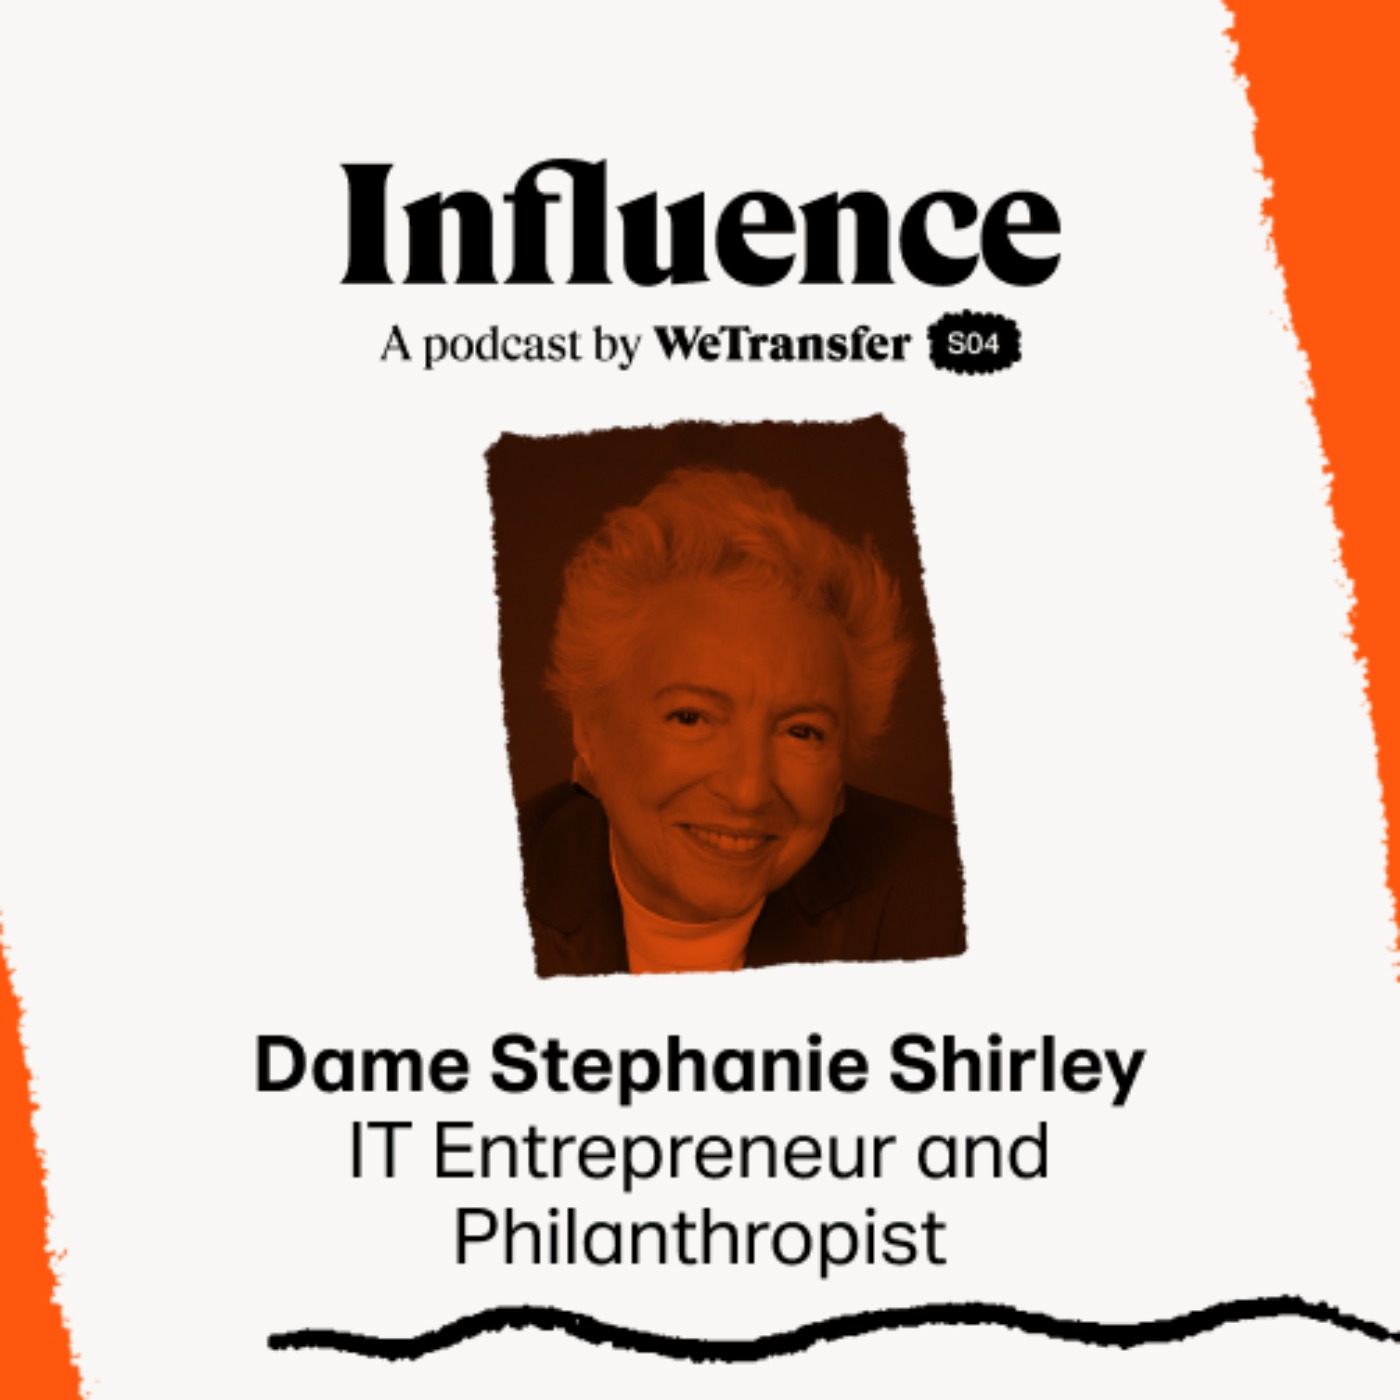 Dame Stephanie Shirley on Innovation in Business